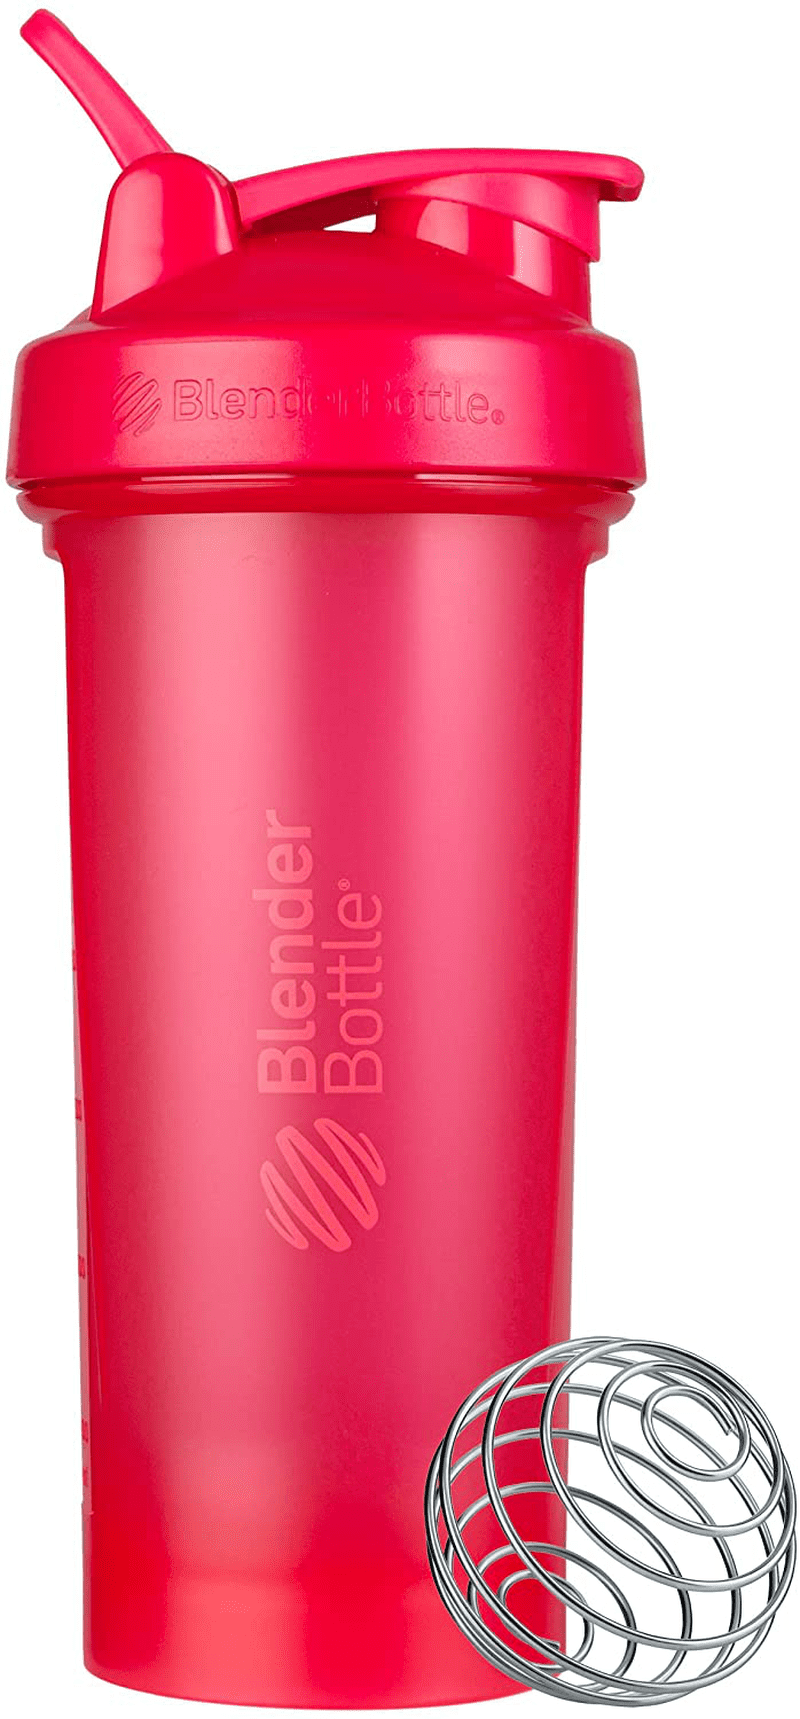 Perfect Shaker Bottle, Classic Protein Shaker Bottle, Action Rod Mixing, Dishwasher Safe, Leak Proof-Blender Shaker Bottle with Classic Loop Top